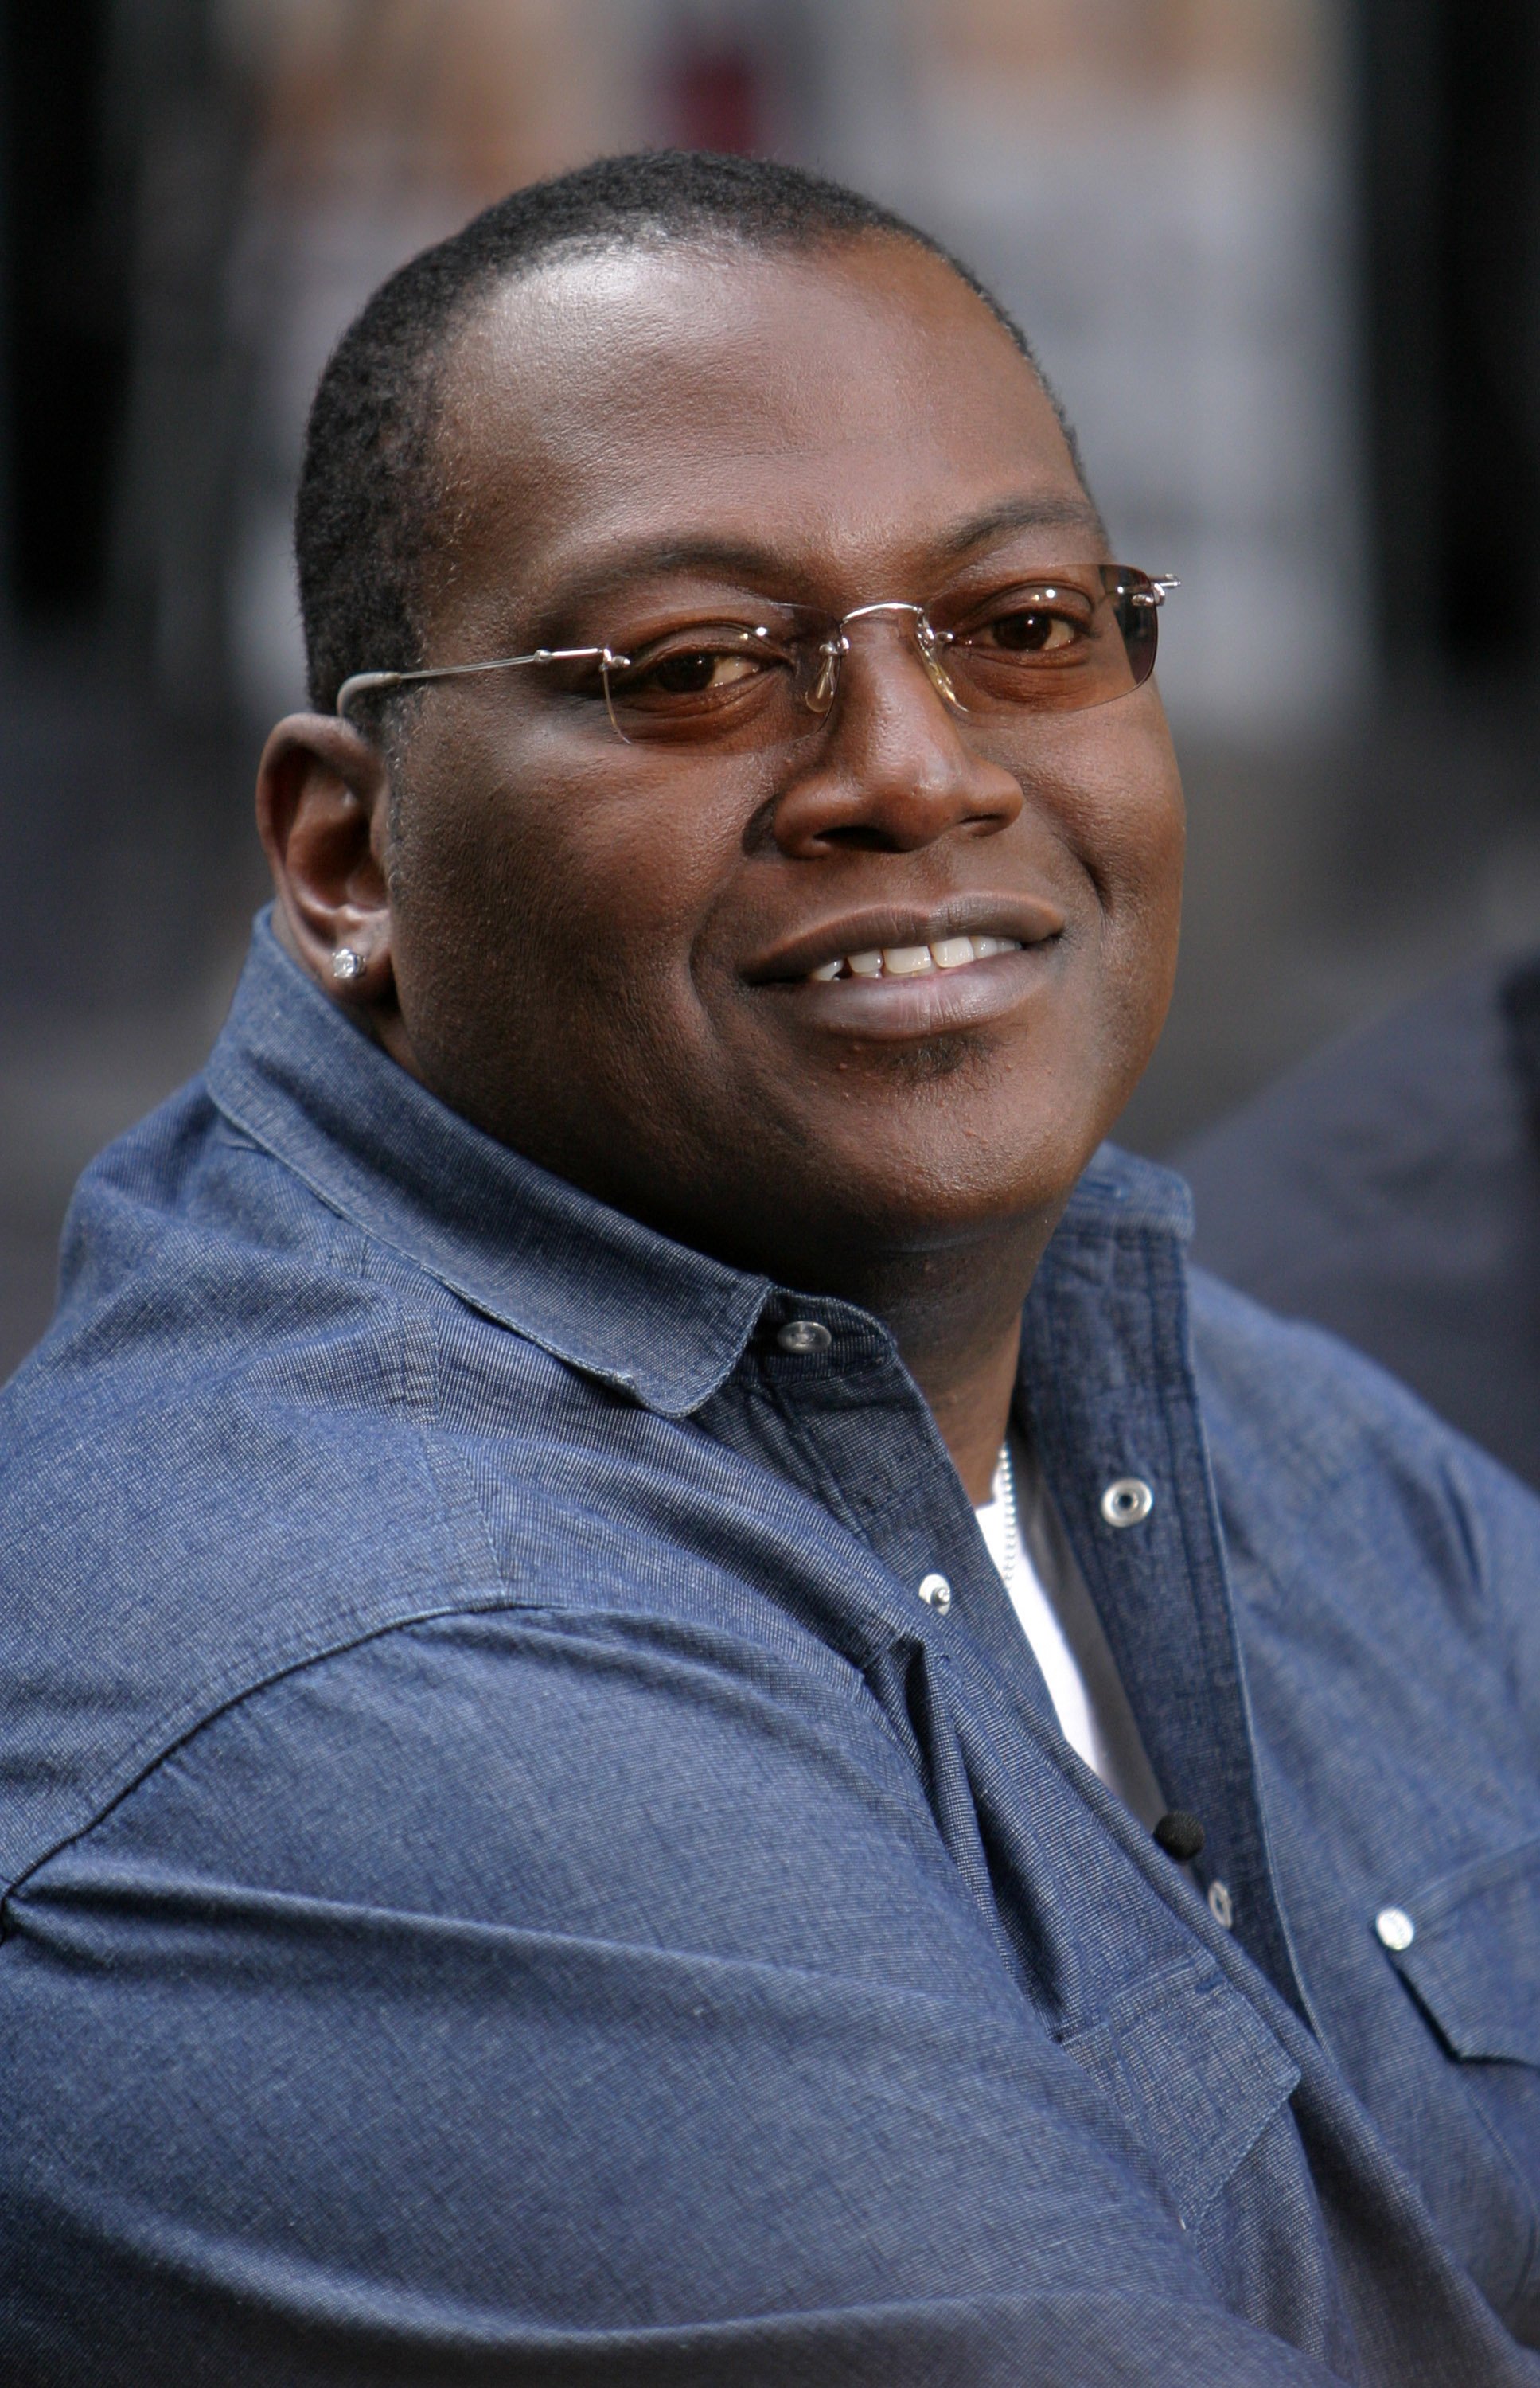 Randy Jackson during Mariah Carey Performs on The Today Show Summer Concert Series at NBC Studios, Rockefeller Center on May 30, 2003 in New York City, New York. | Source: Getty Images